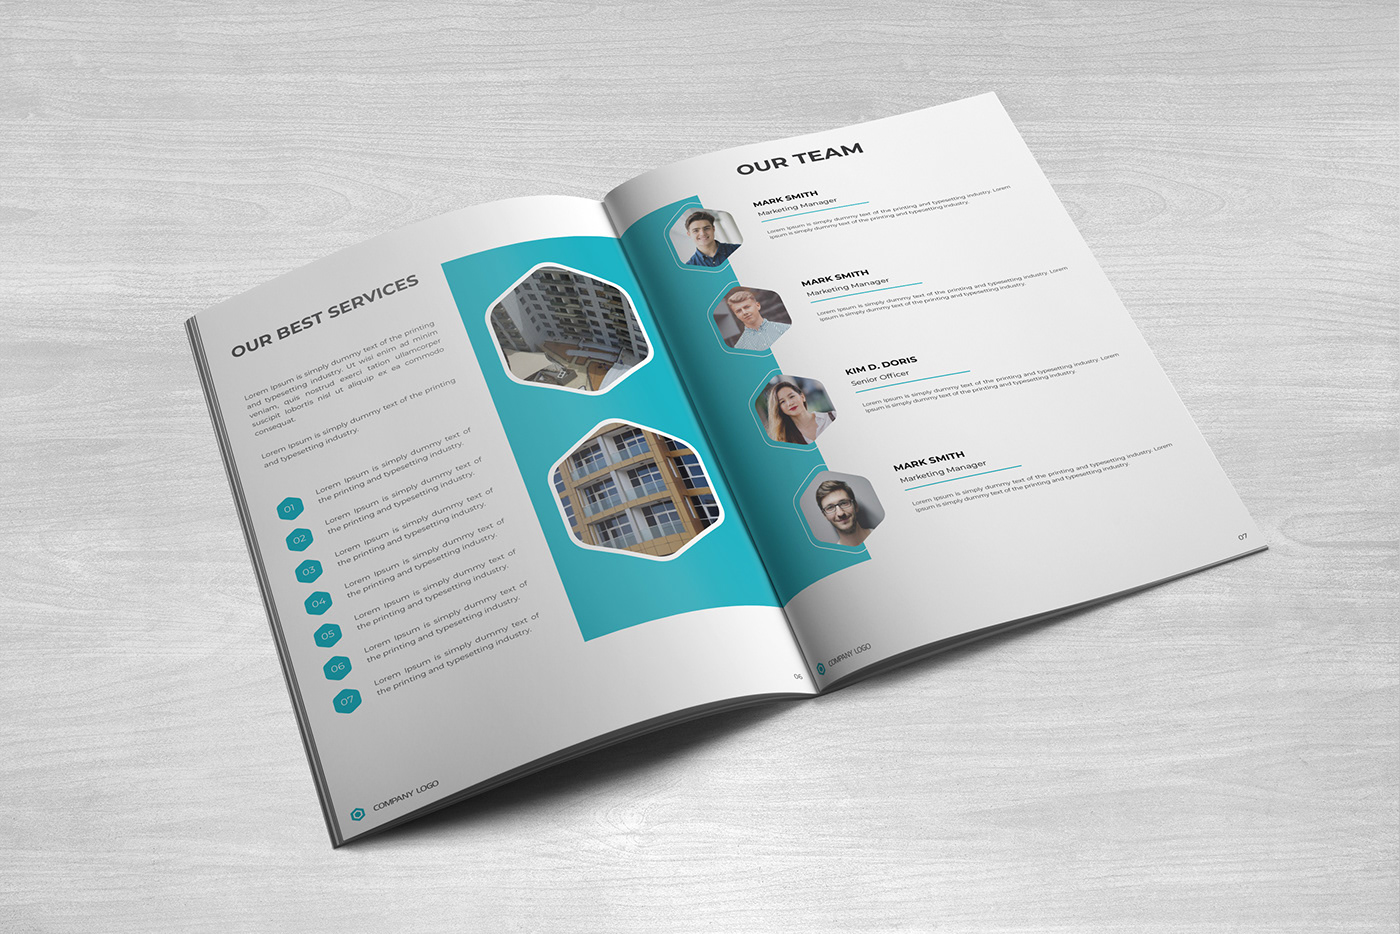 Creative Company Profile  FREE TEMPLATE DOWNLOAD on Behance Inside Free Business Profile Template Download